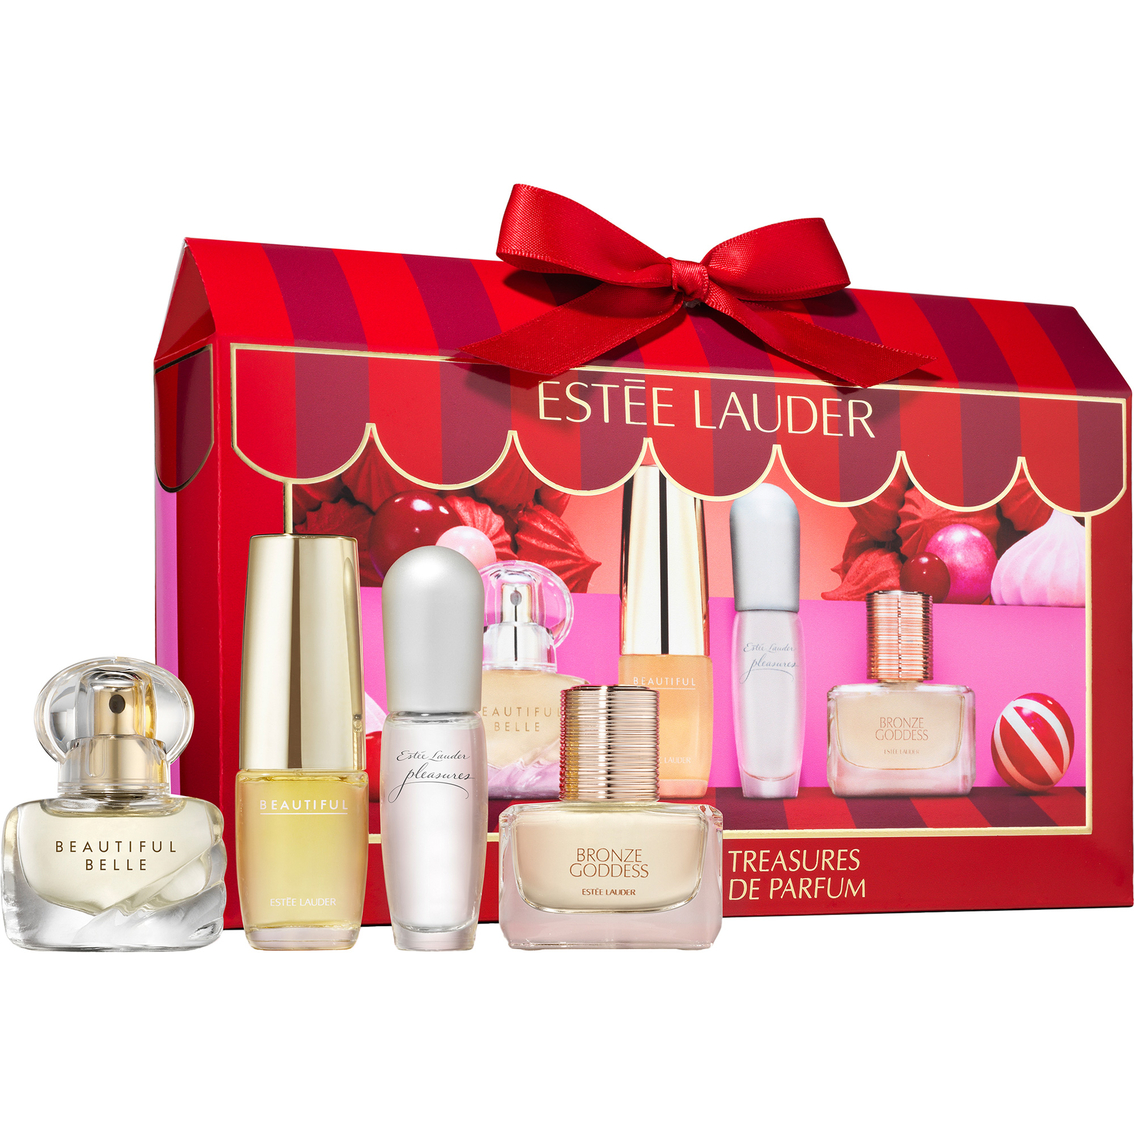 Estee Lauder Fragrance Treasures 4 Pc. Gift Set, Gifts Sets For Her, Beauty & Health